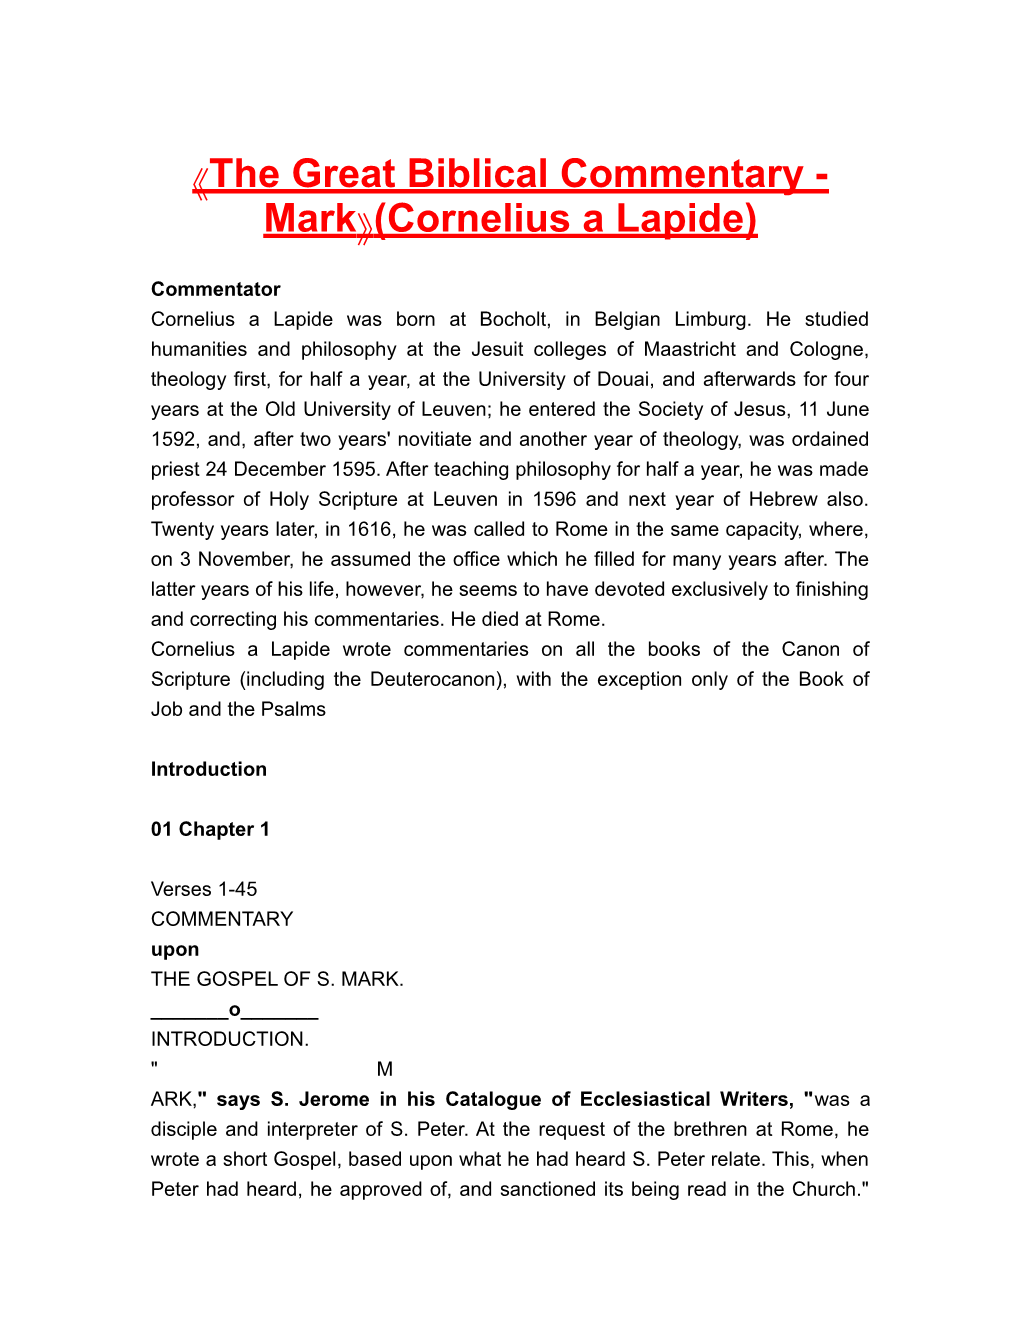 The Great Biblical Commentary - Mark (Cornelius a Lapide)